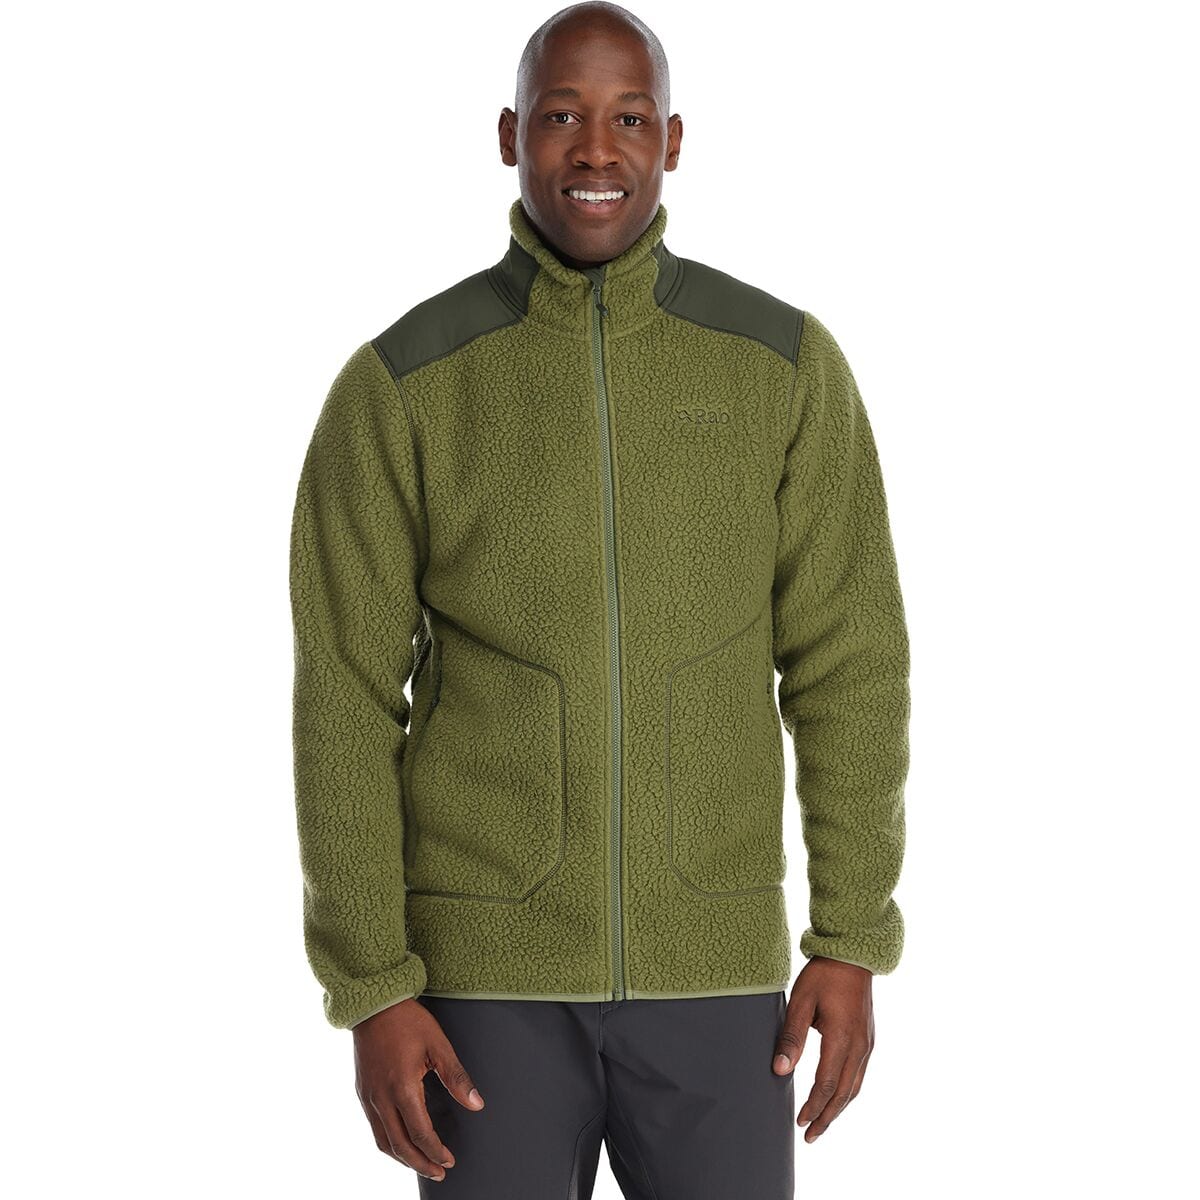 Rab Outpost Jacket - Men's - Clothing